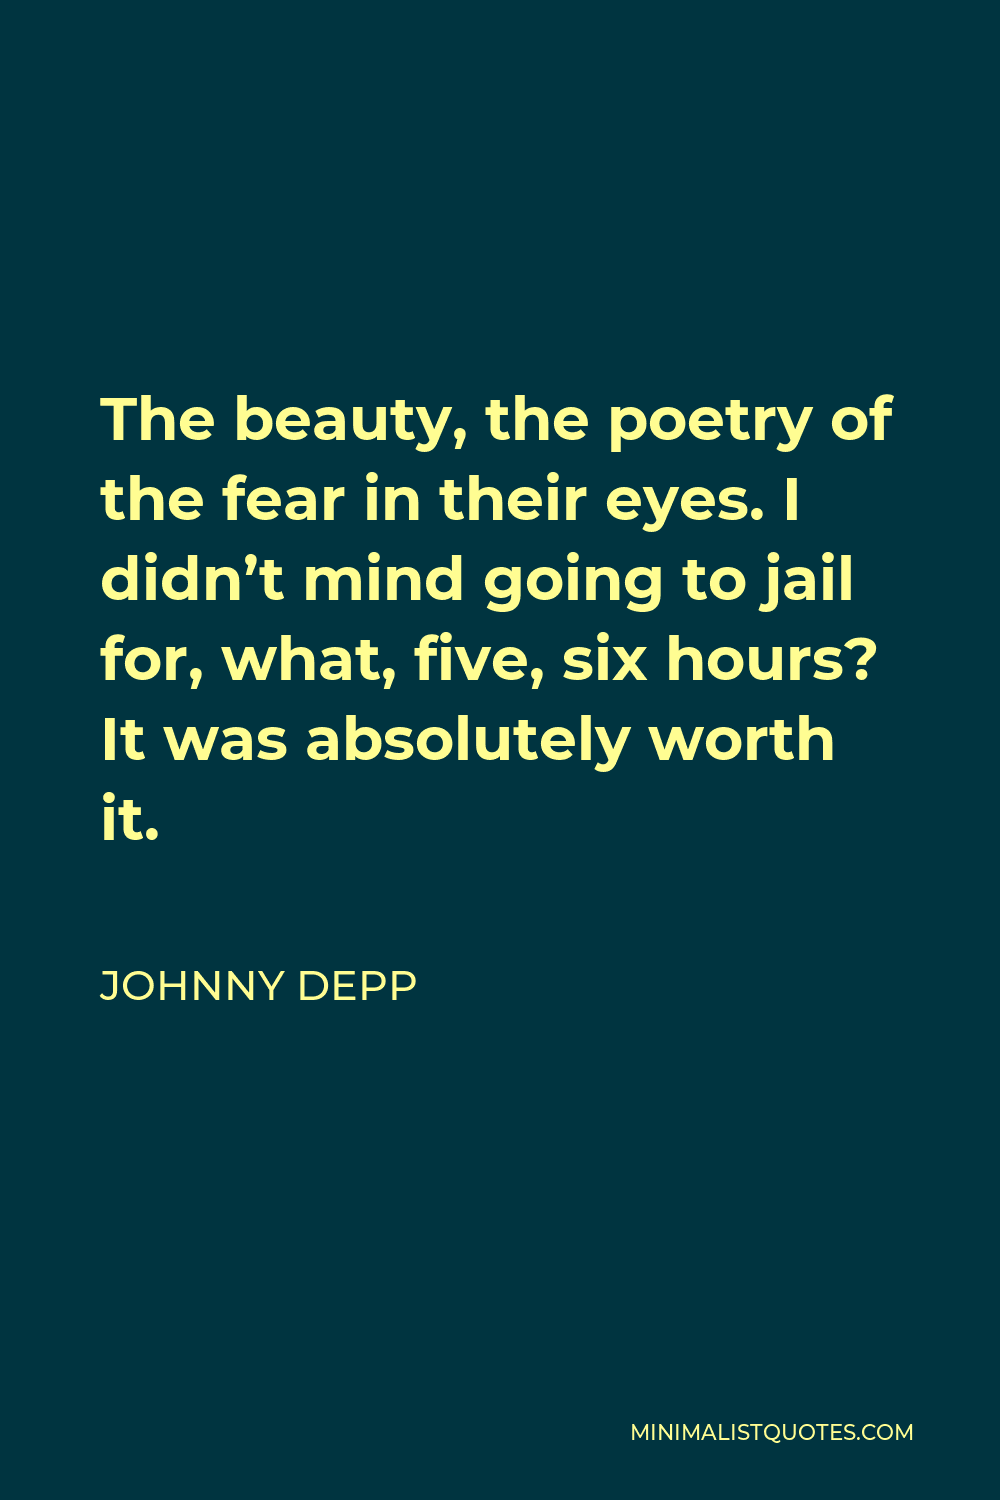 Johnny Depp Quote - The beauty, the poetry of the fear in their eyes. I didn’t mind going to jail for, what, five, six hours? It was absolutely worth it.